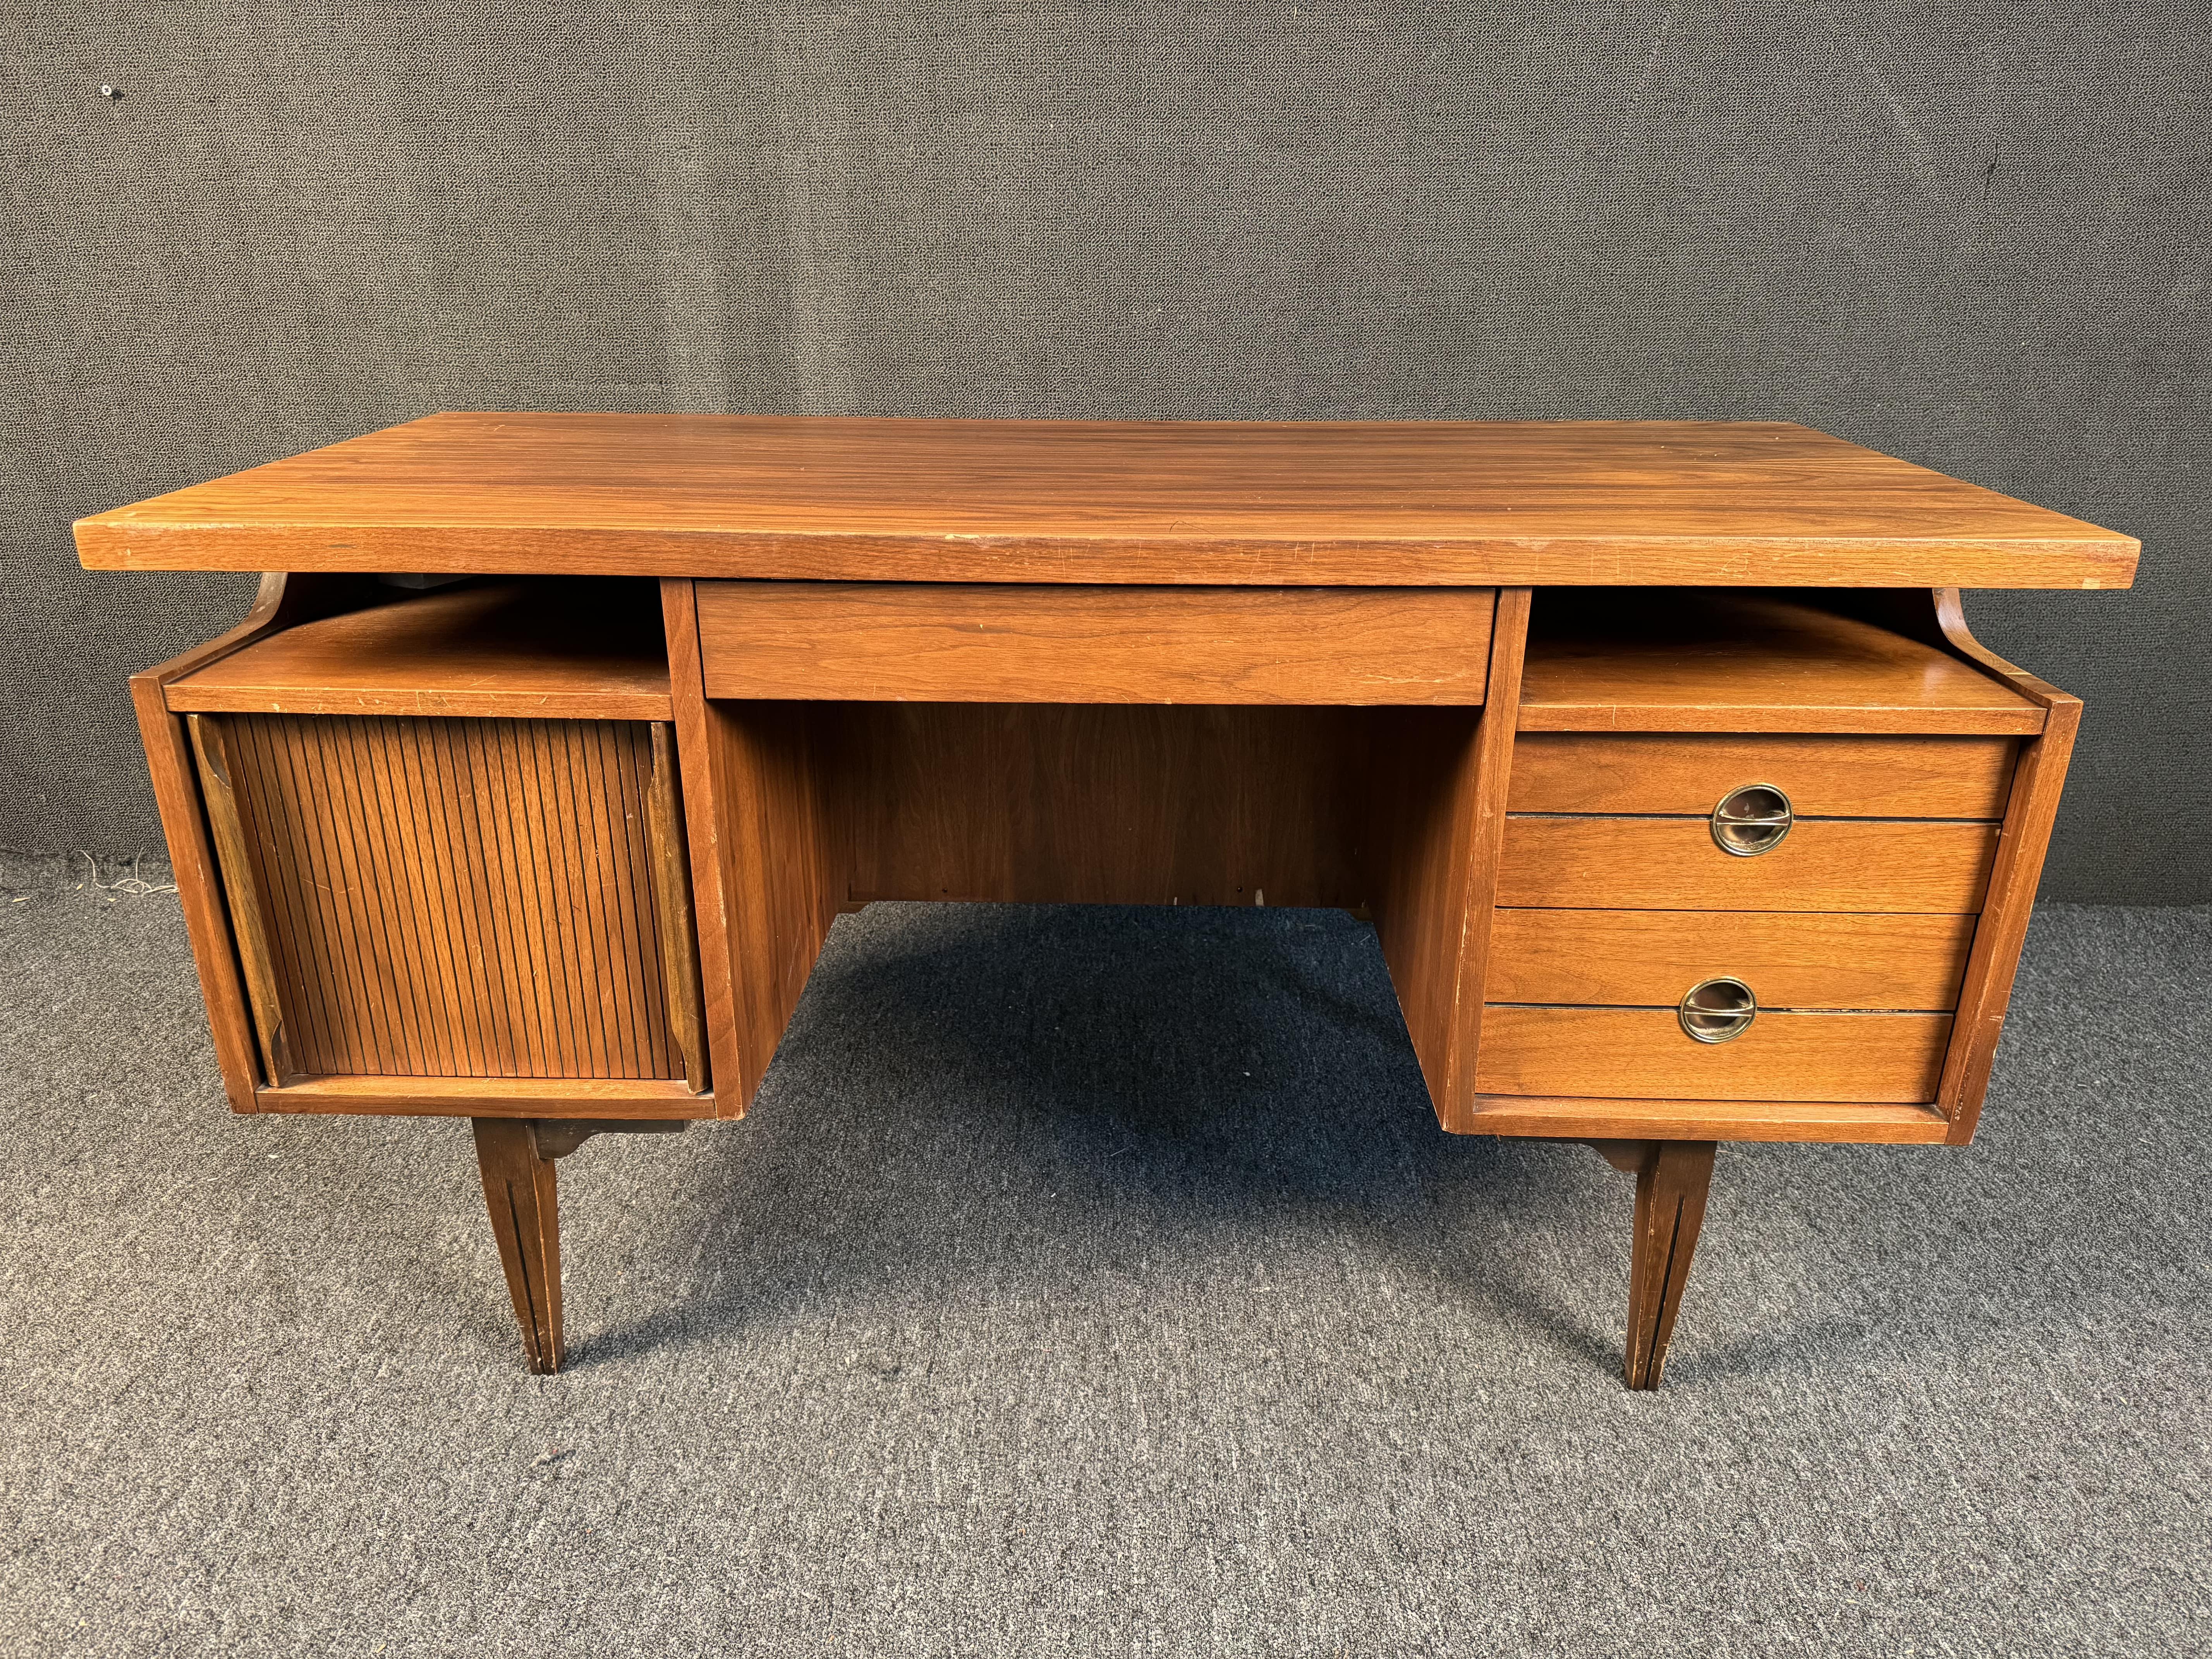 American walnut desk by Hooker Furniture c. 1960s. This desk features a 